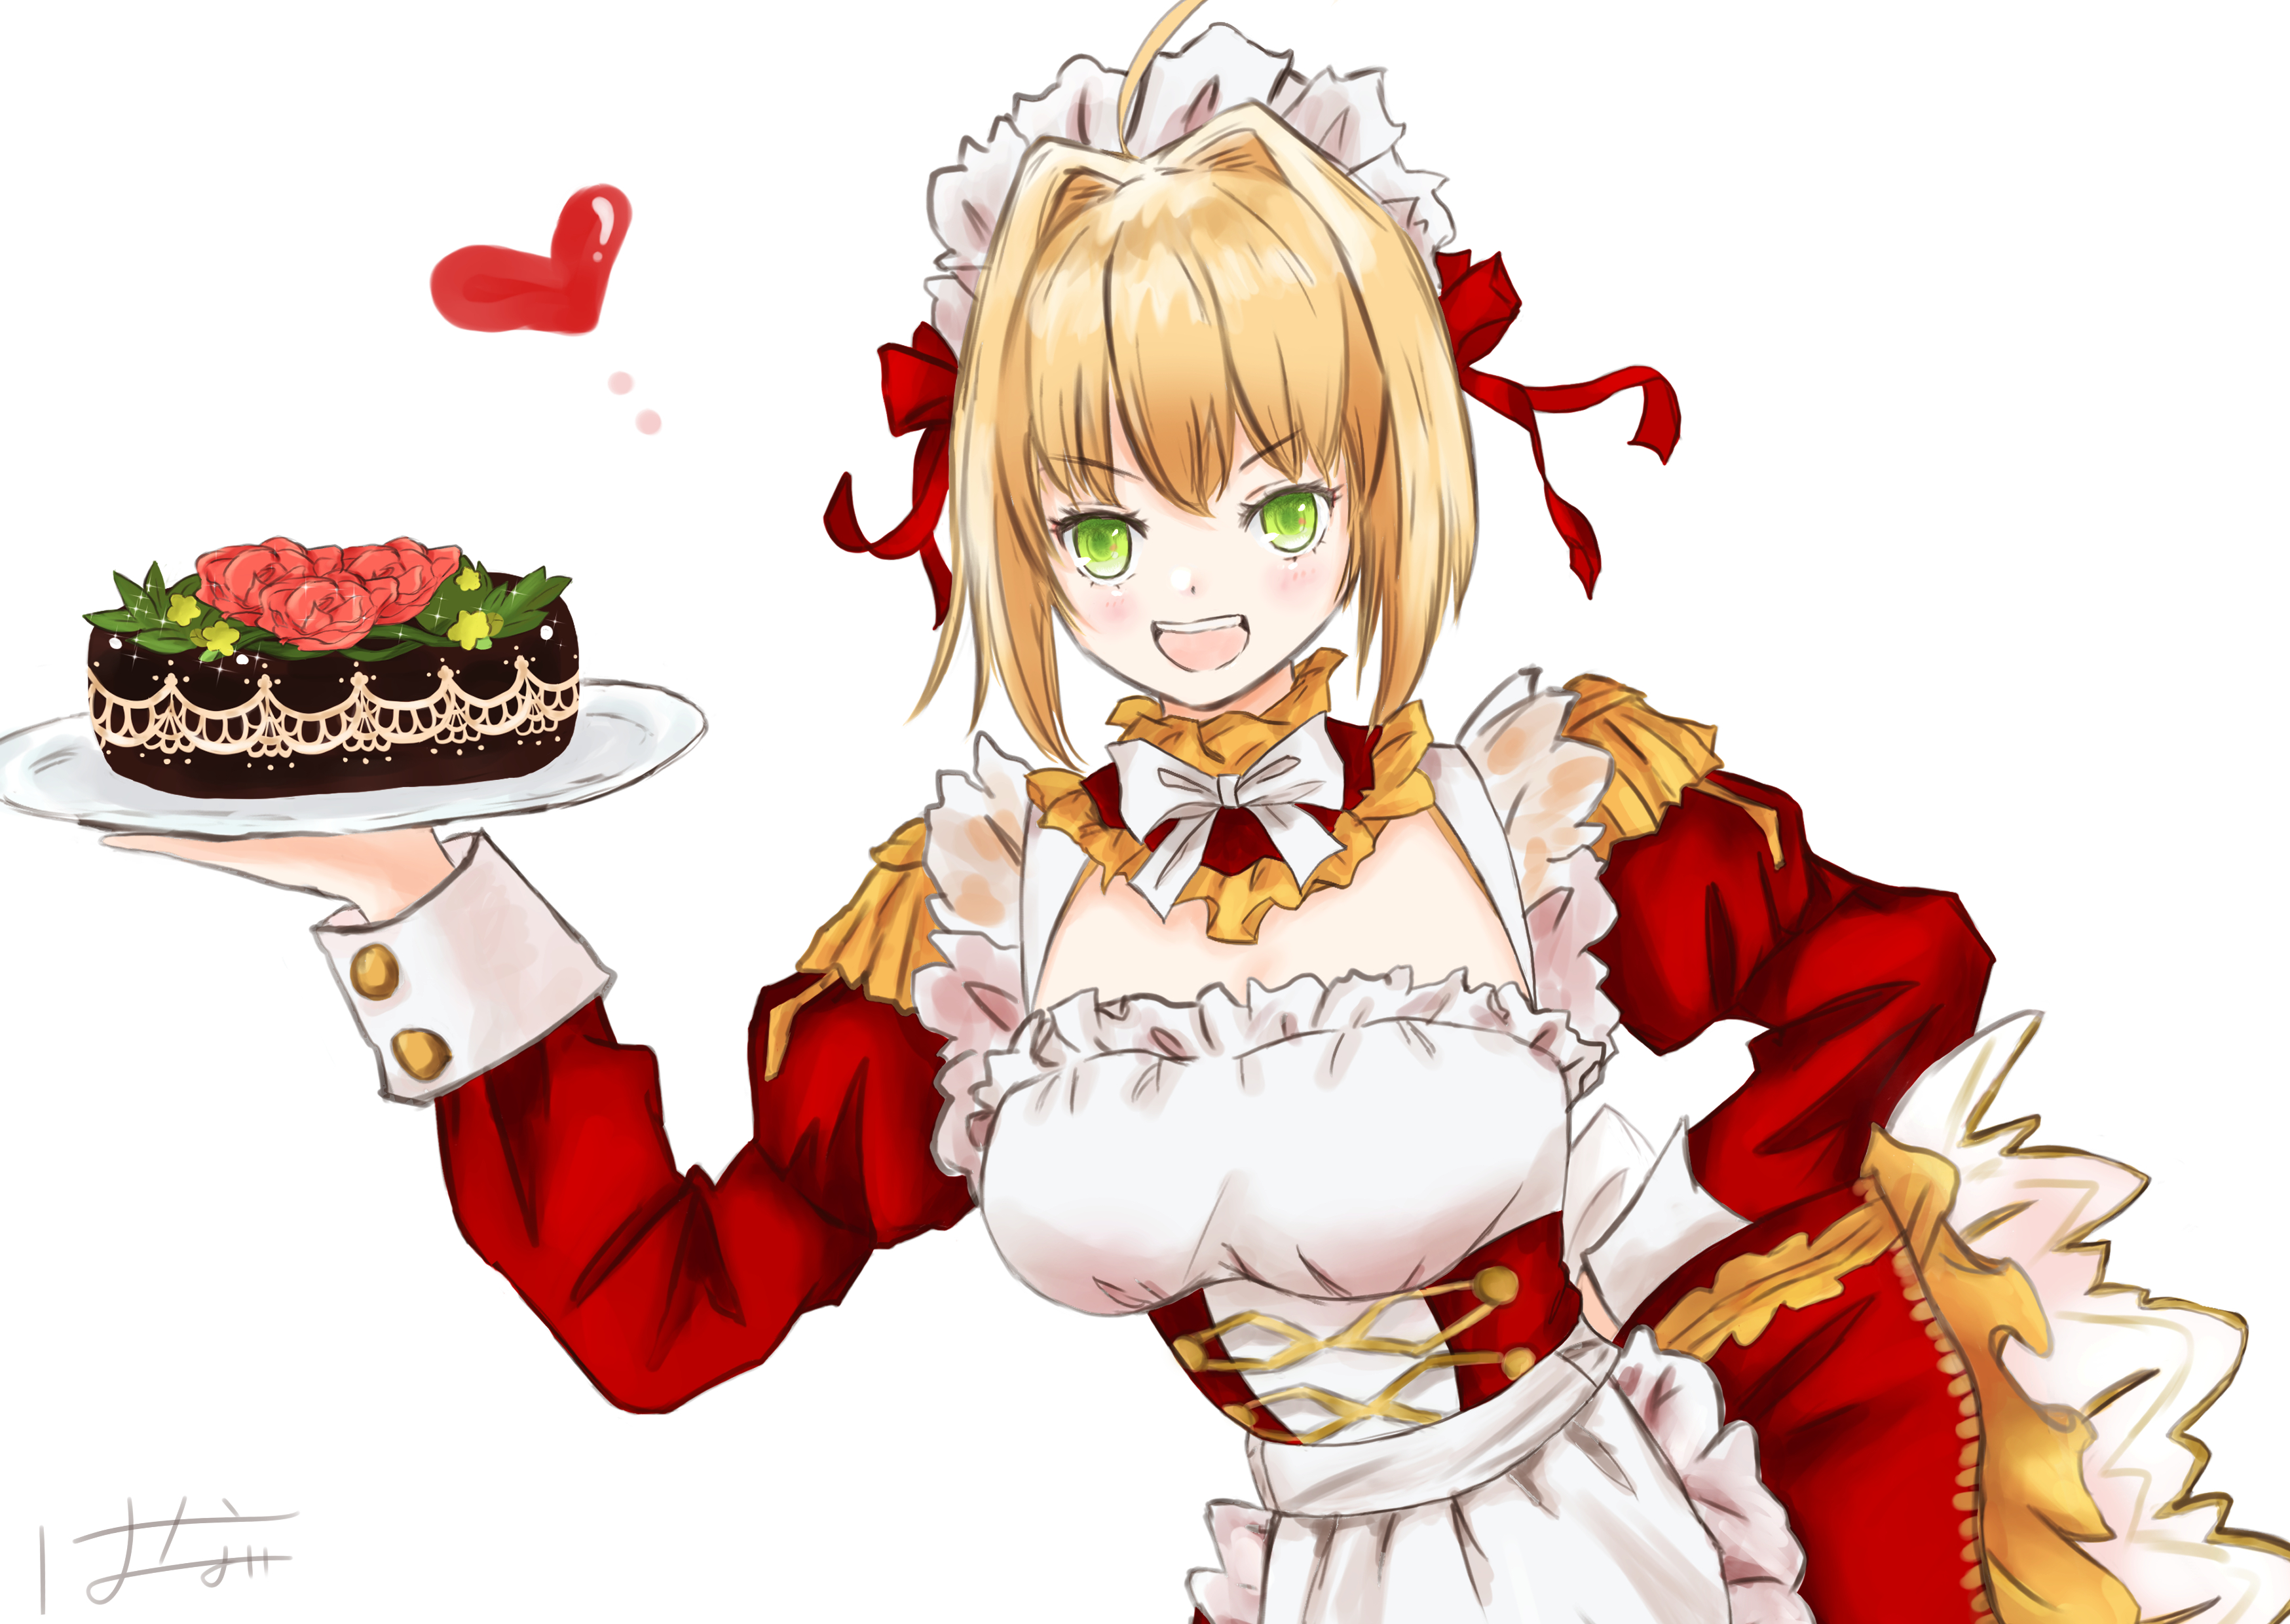 Anime 3496x2480 anime anime girls boobs maid maid outfit Fate series Fate/Extra Fate/Extra CCC Fate/Grand Order blonde long hair artwork digital art fan art